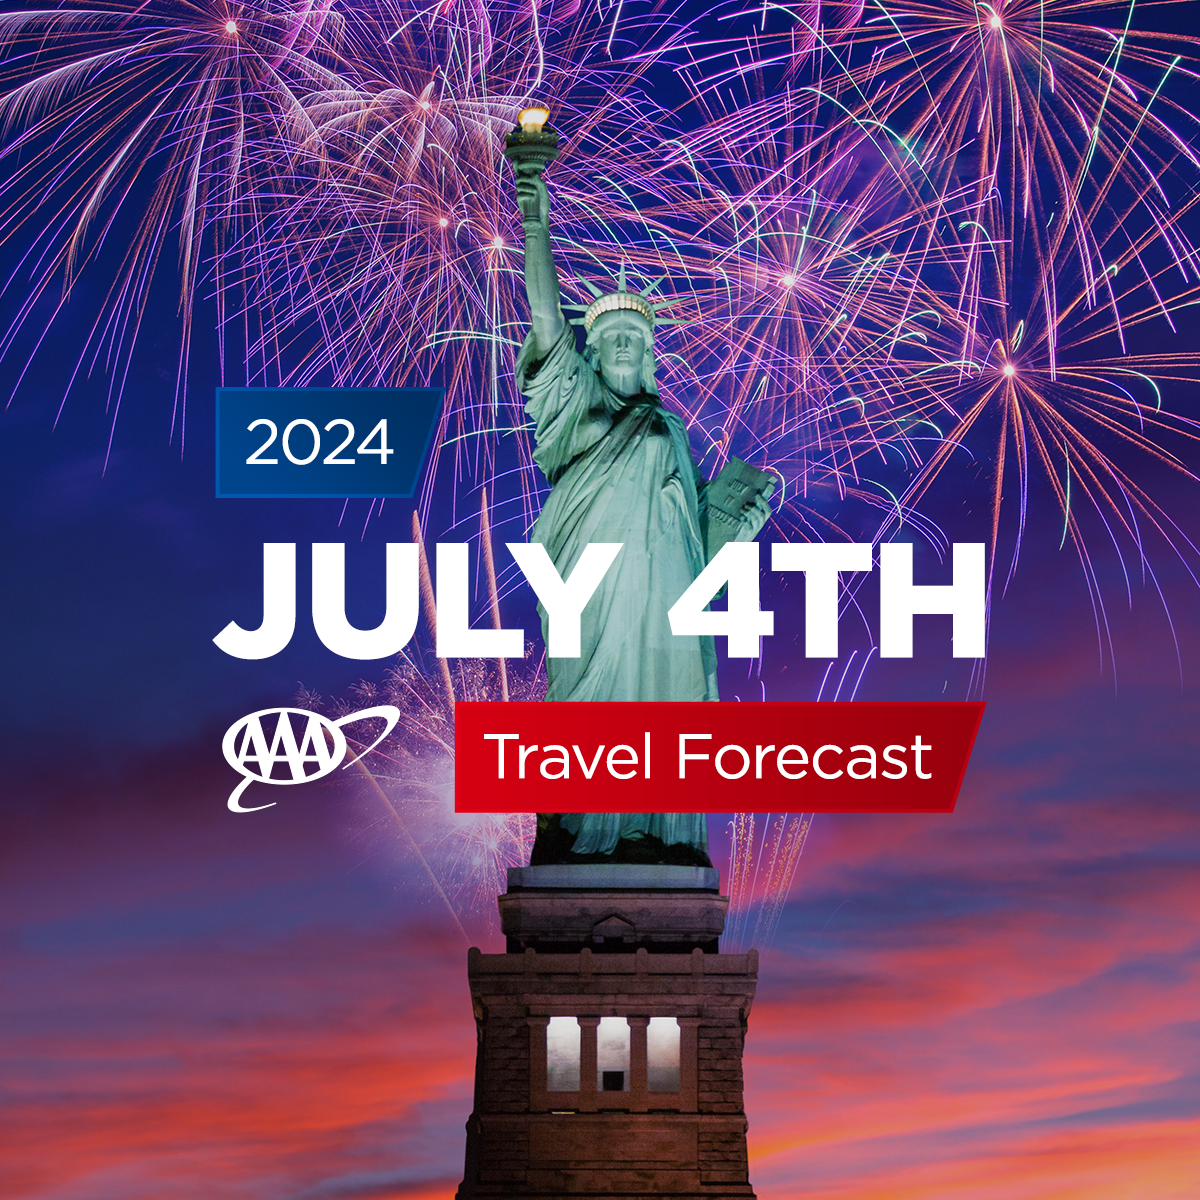 This year’s extended Independence Day forecast exceeds pre-pandemic numbers, sets new record